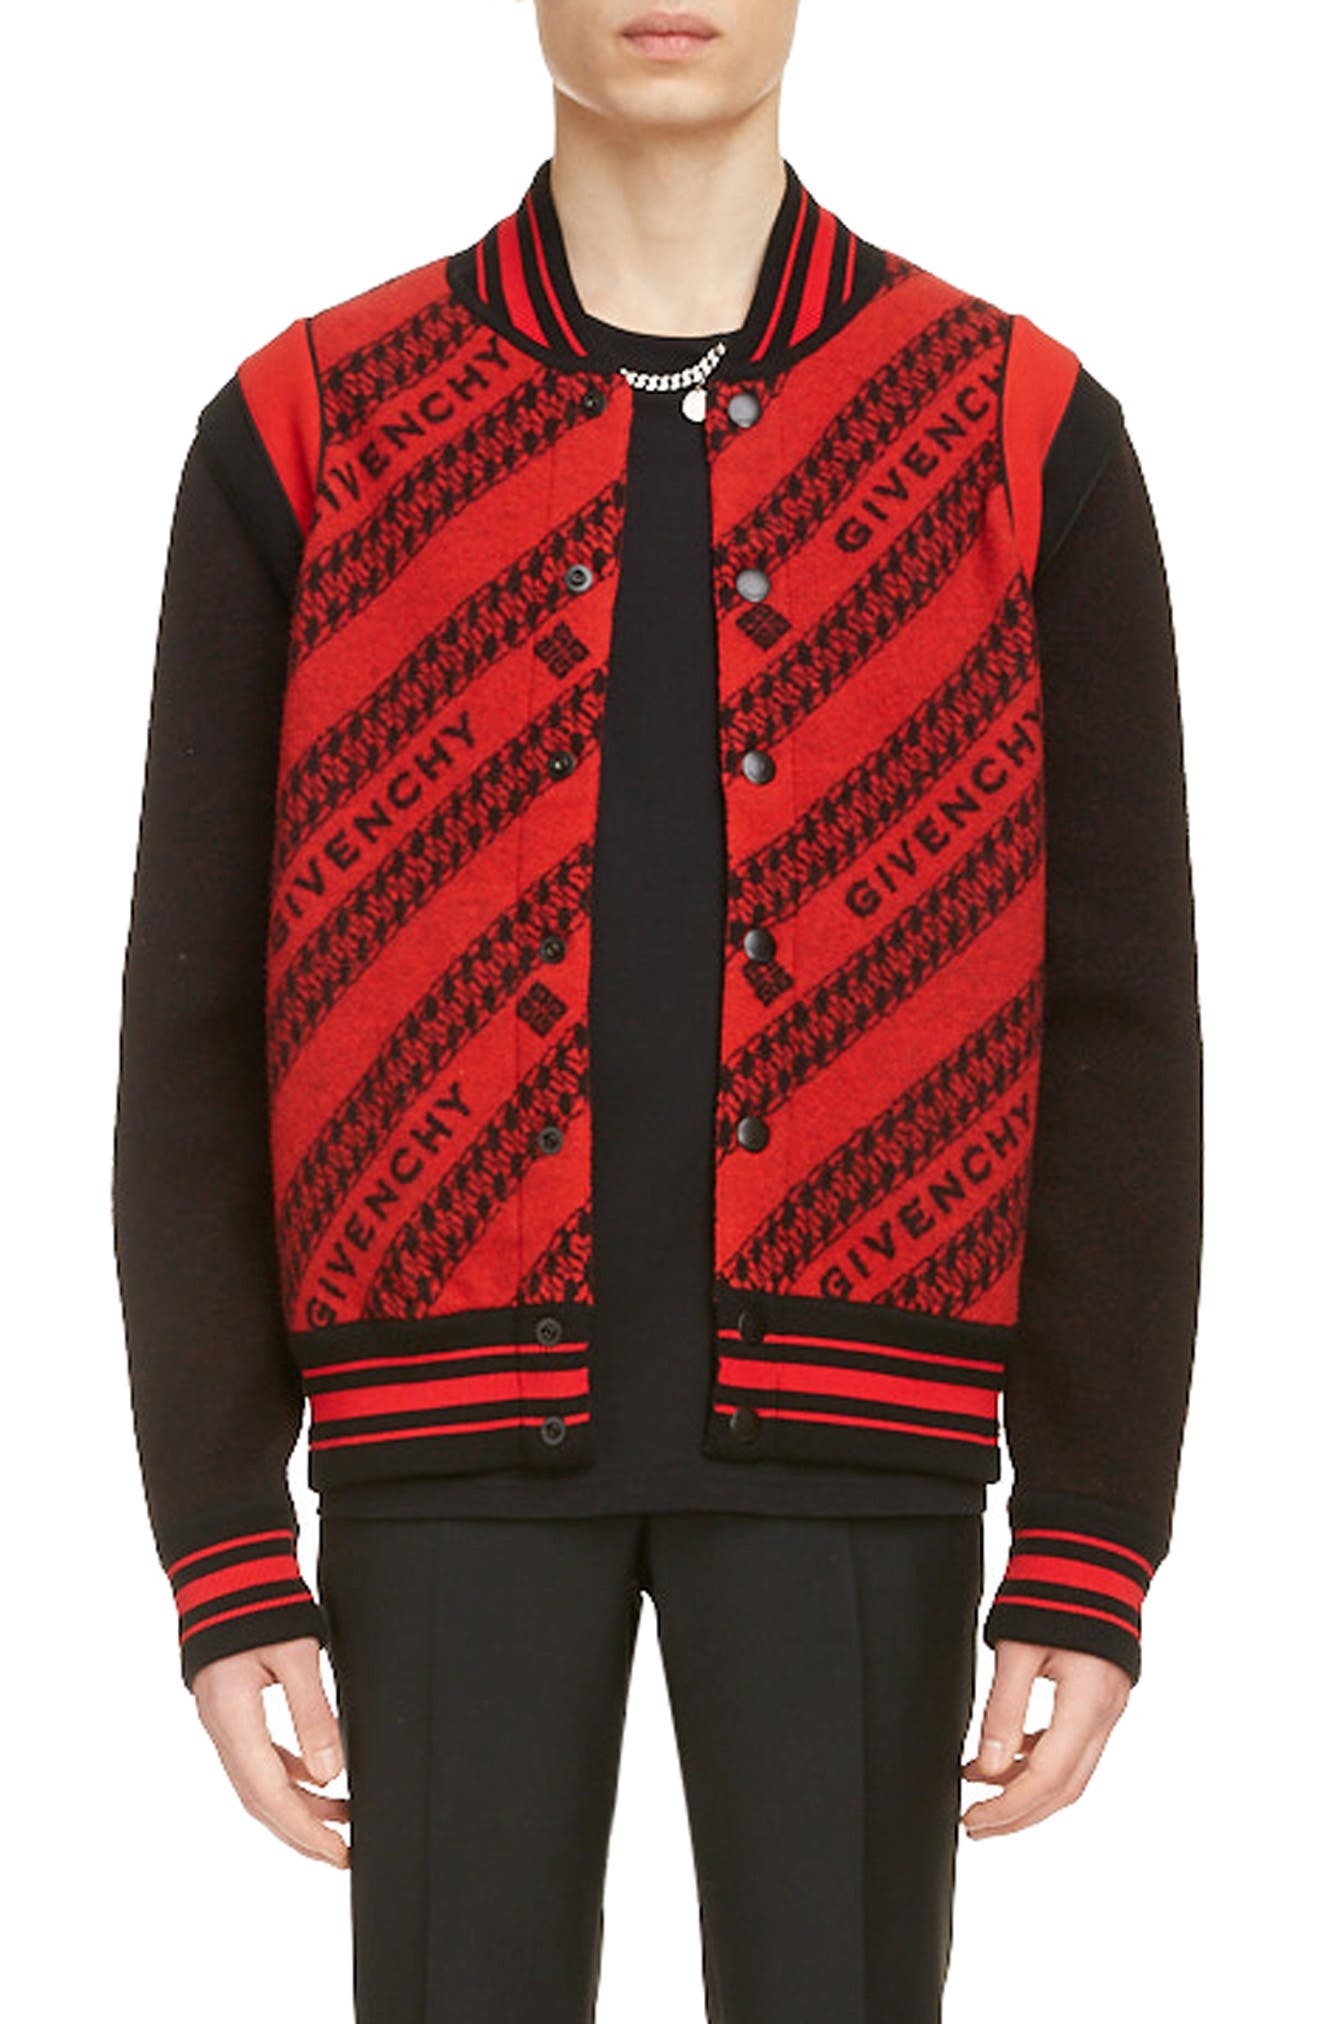 givenchy red bomber jacket